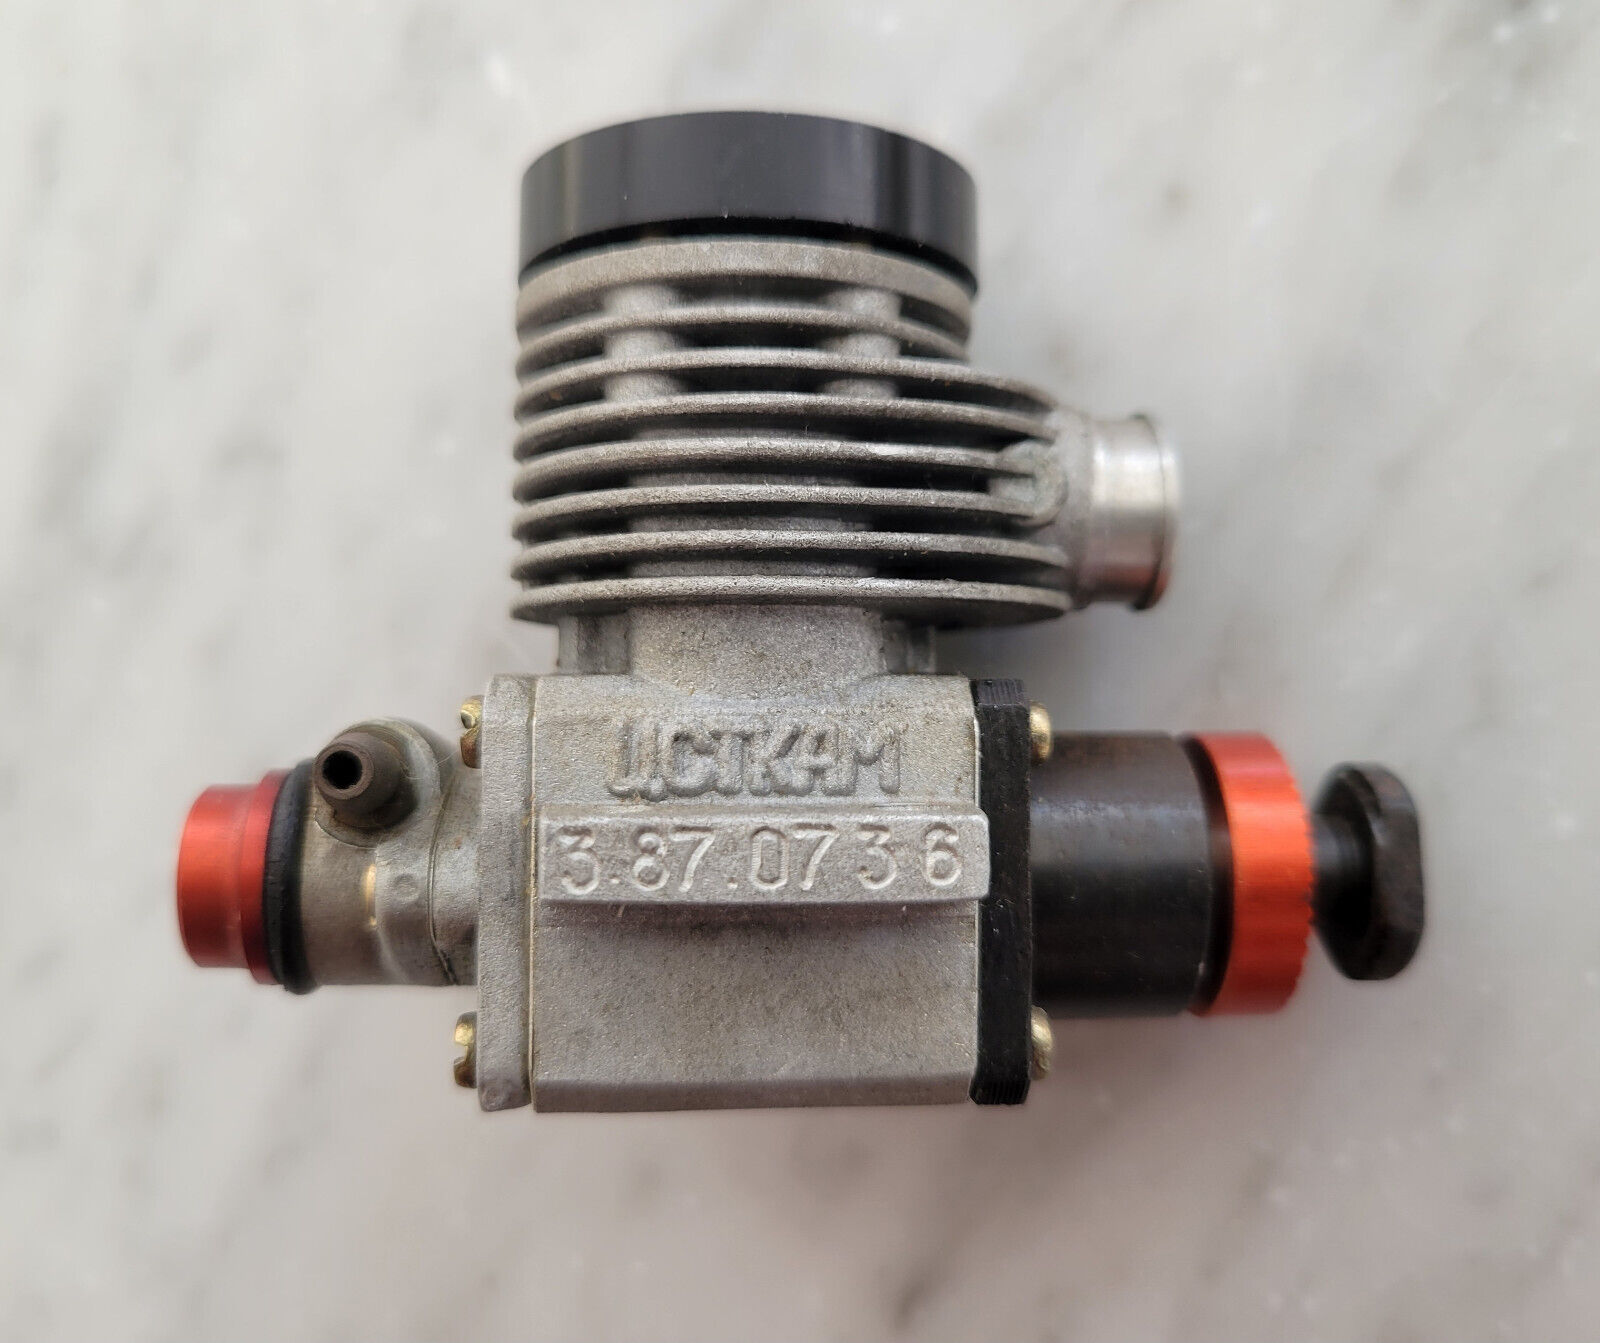 UCTKAM 1.5cc VINTAGE GLOW ENGINE FOR CARS or BOATS